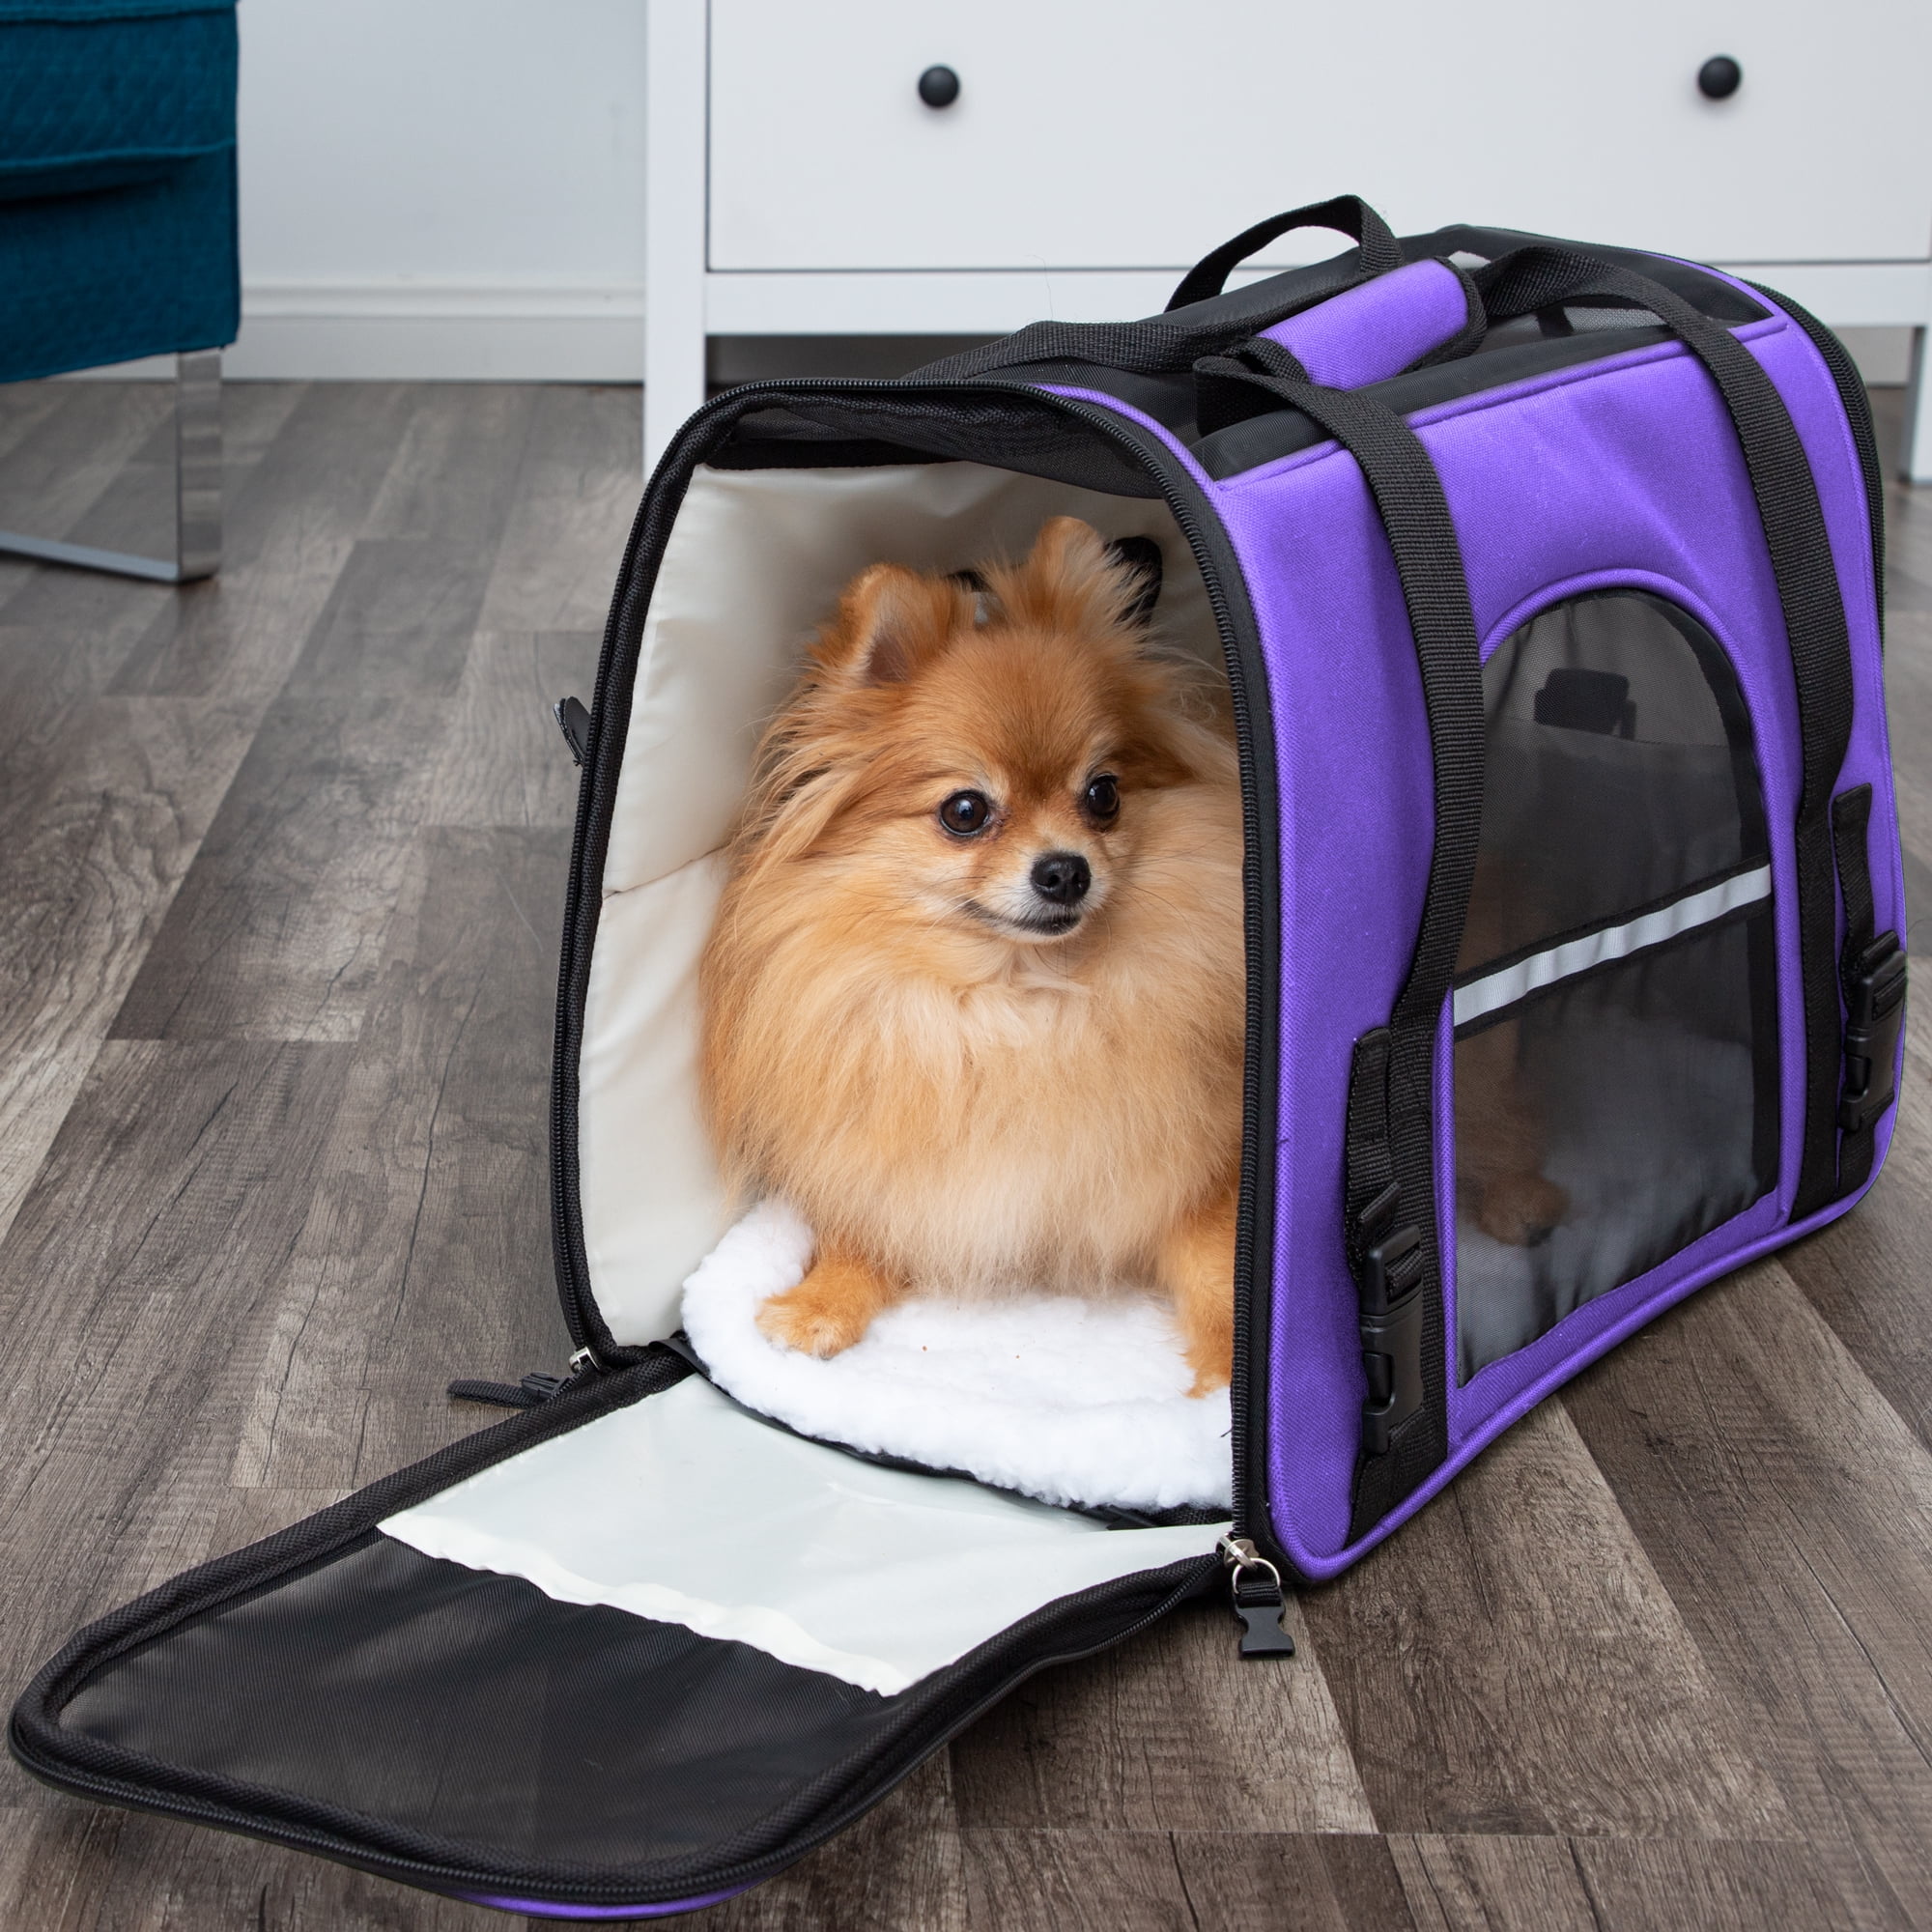 Henkelion Large Cat Carriers Dog Carrier Pet Carrier for Large Cats Dogs Puppies Up to 25lbs, Big Dog Carrier Soft Sided, Collapsible Waterproof